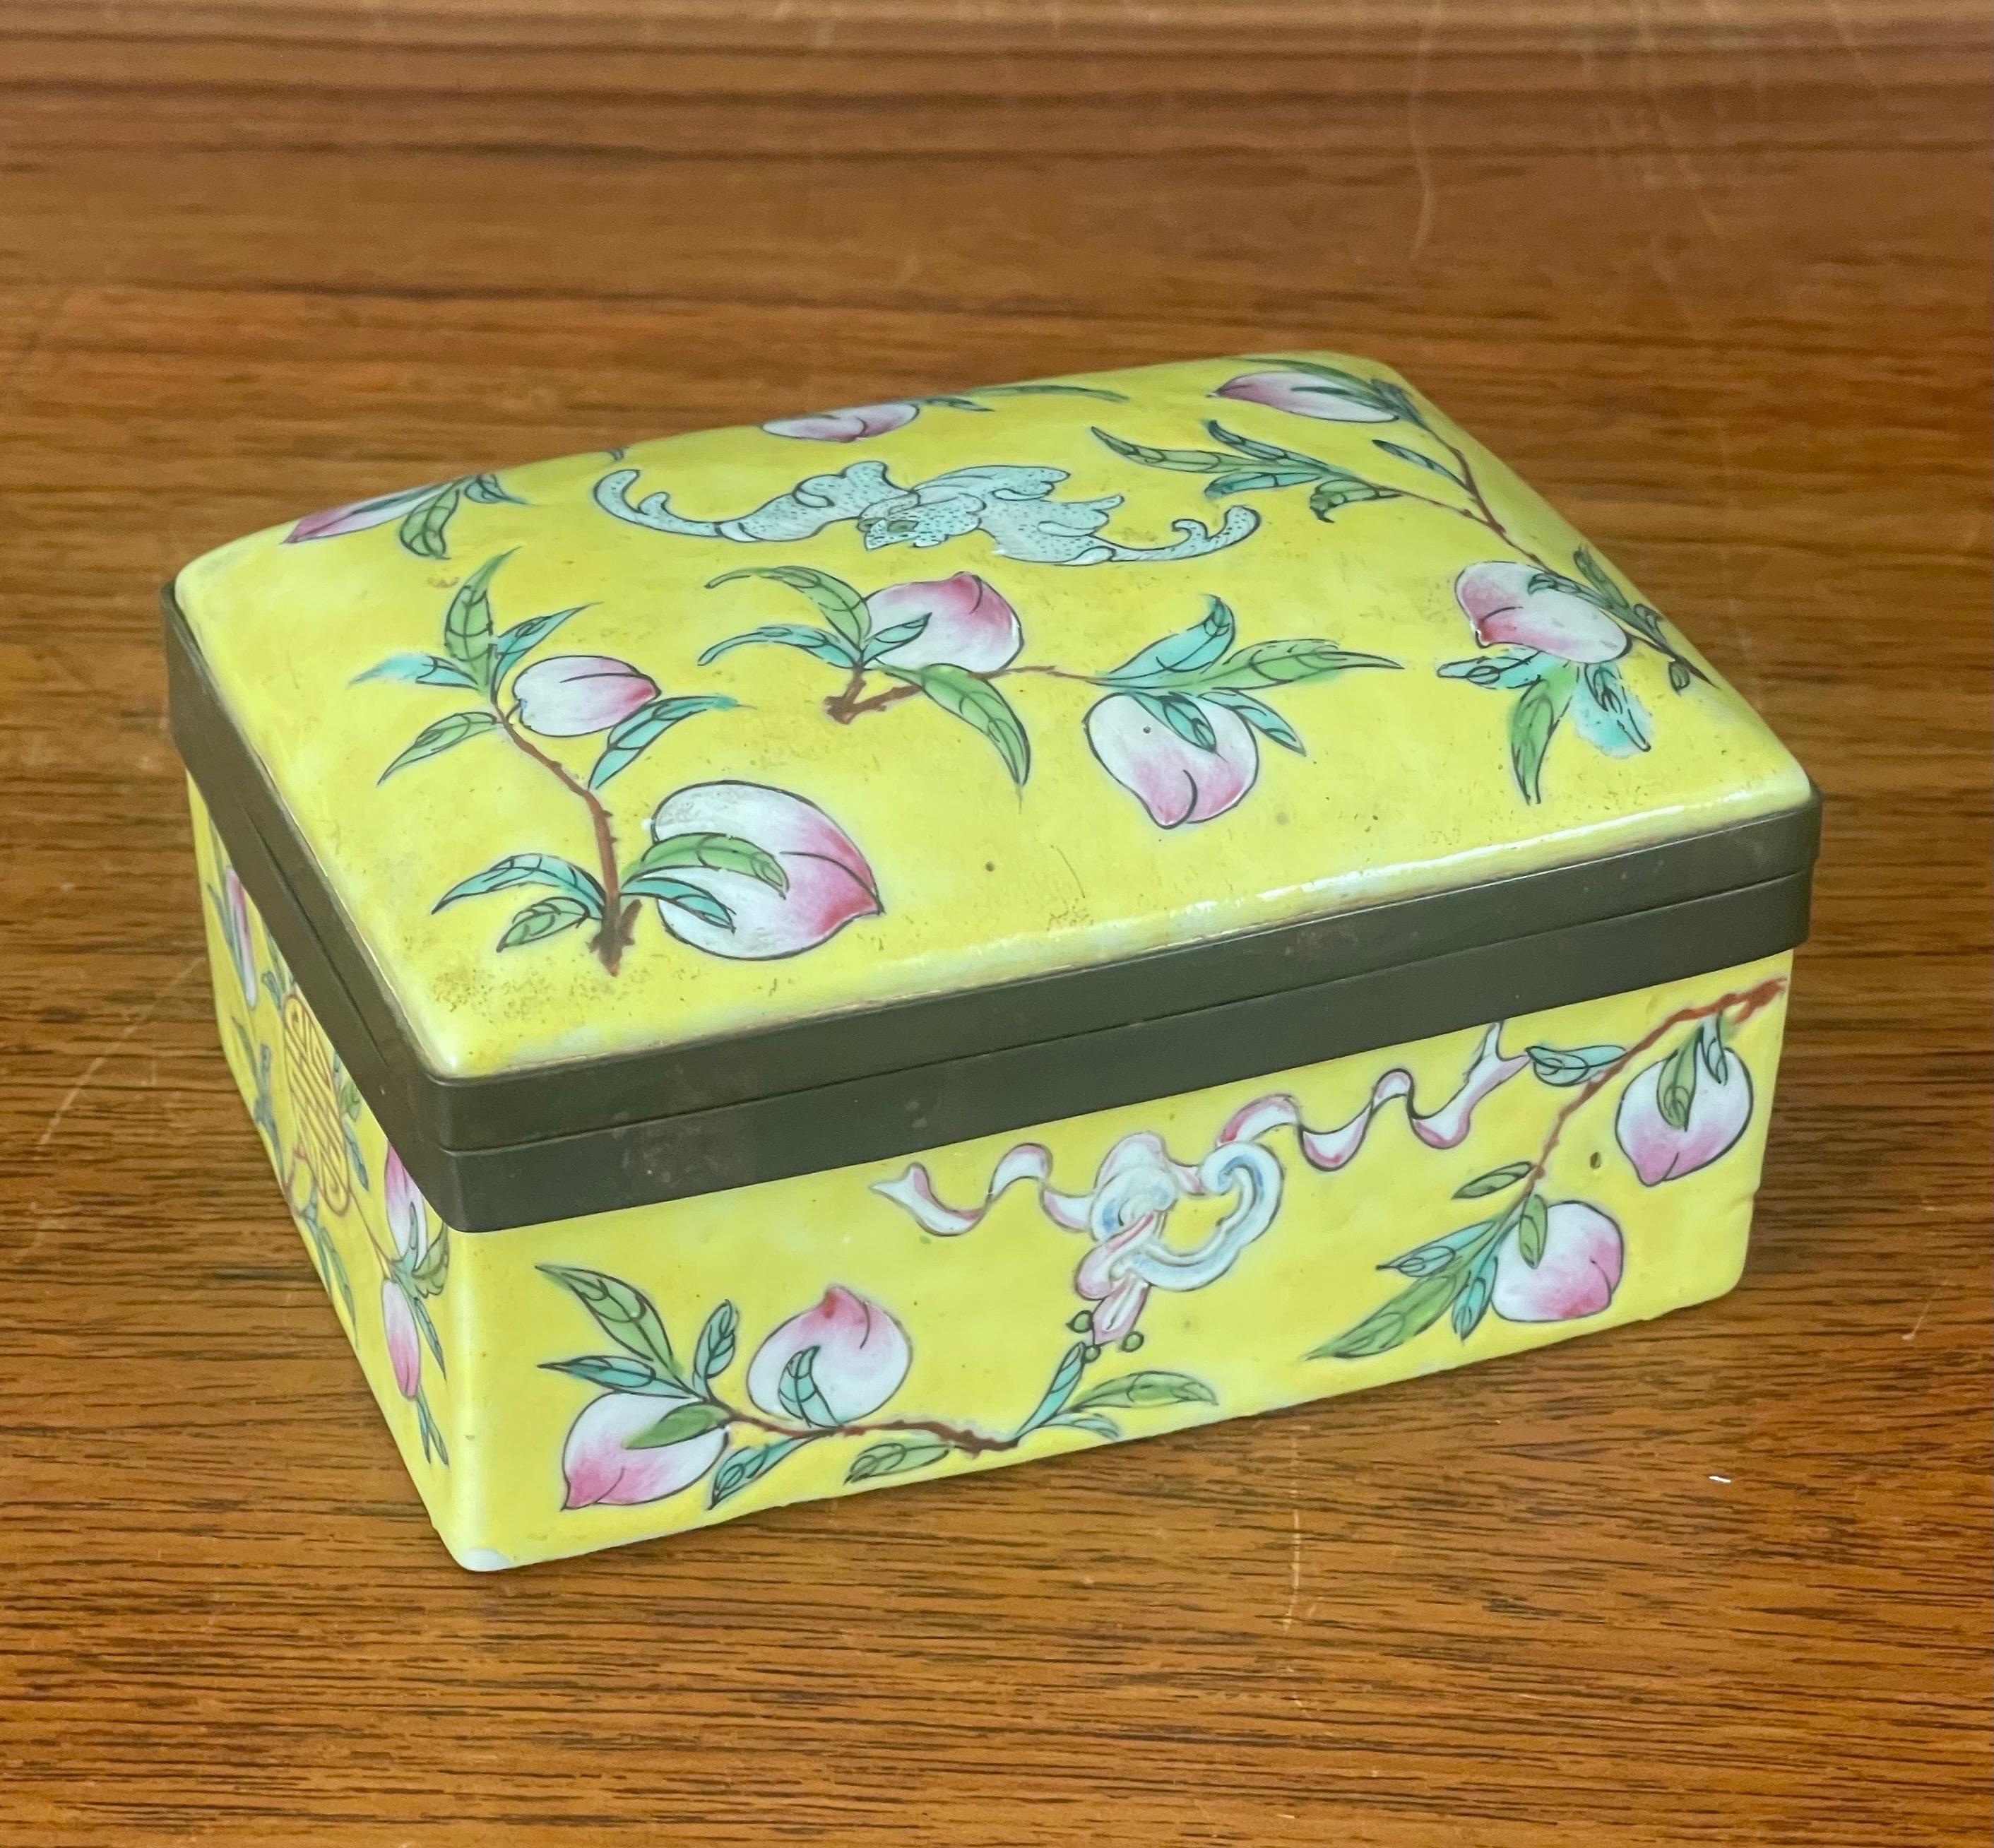 A wonderful and colorful hand painted Chinese lidded trinket box, circa 1950s. The handcrafted ceramic box measures 4.5